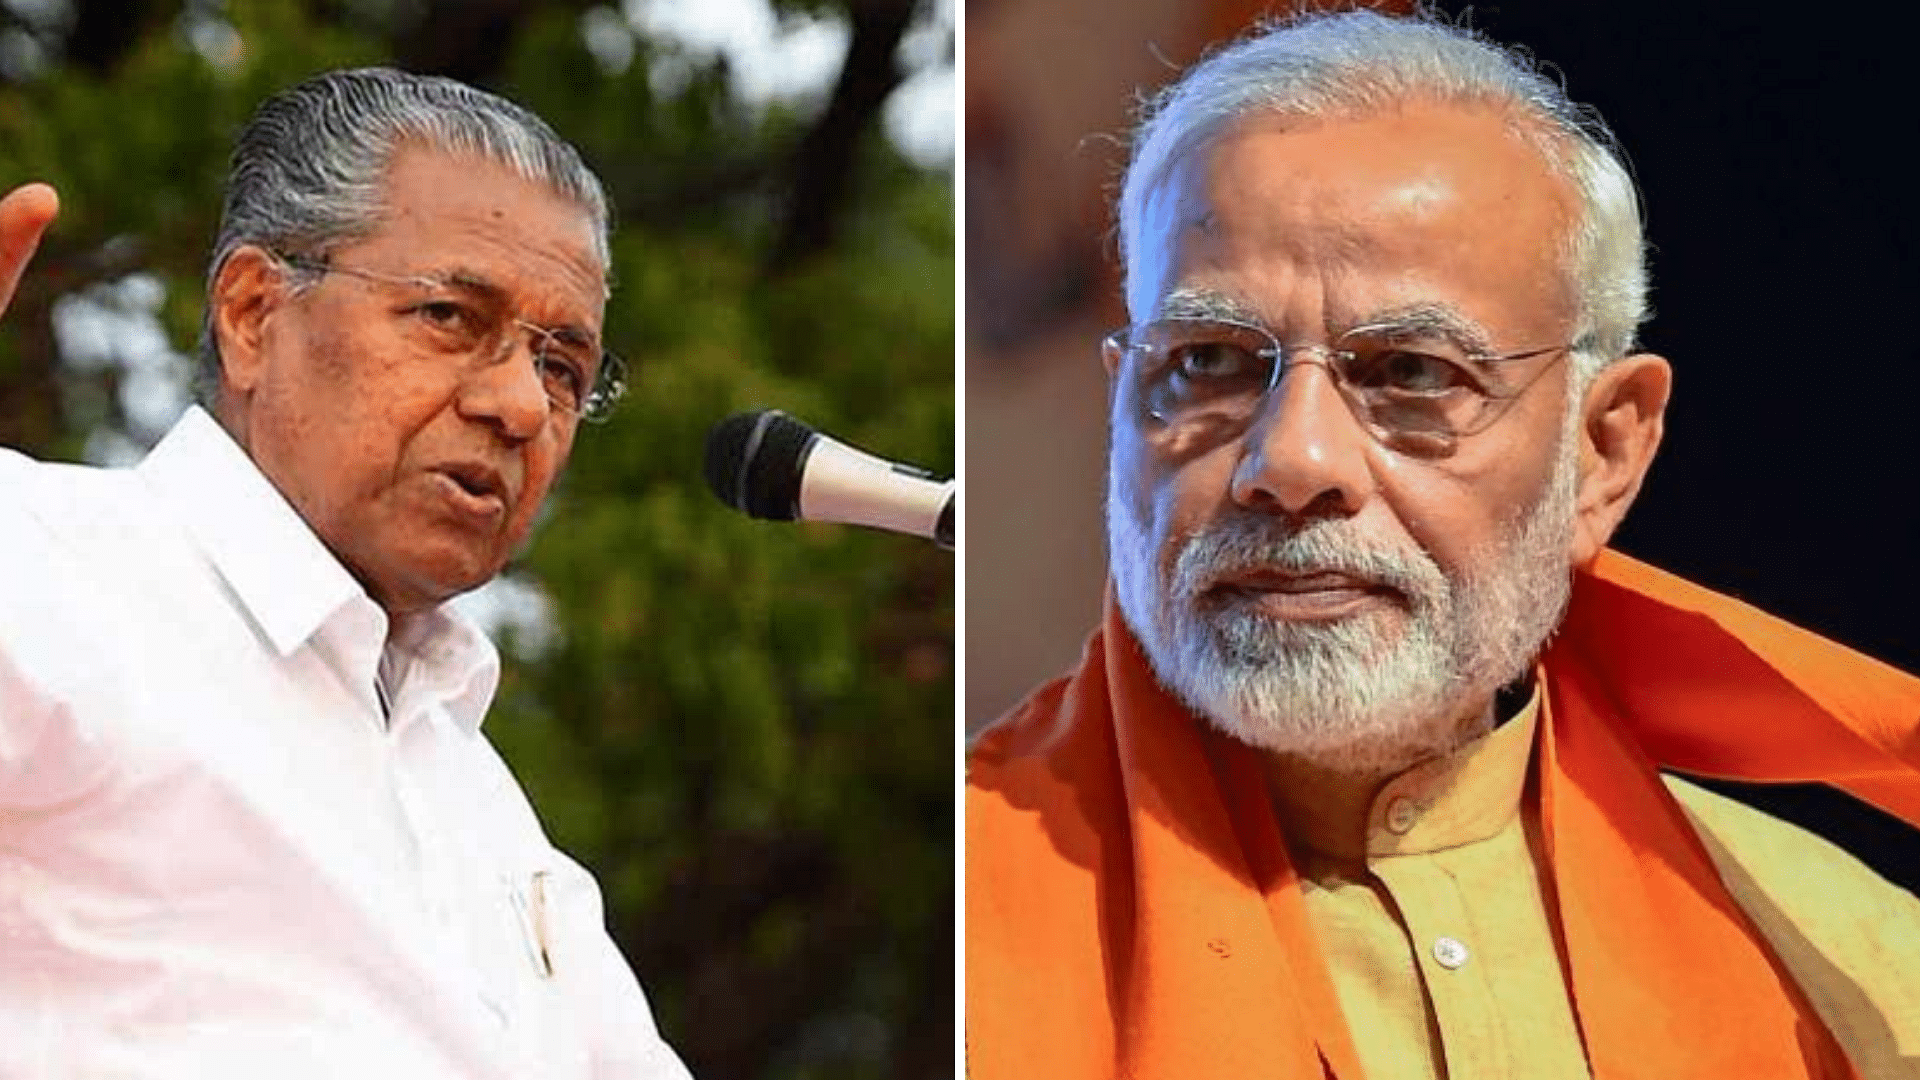 <div class="paragraphs"><p><a href="https://www.thequint.com/topic/kerala-cm">Kerala Chief Minister</a> Pinarayi Vijayan has asked <a href="https://www.thequint.com/topic/prime-minister-narendra-modi">Prime Minister Narendra Modi</a> to intervene in the issue of <a href="https://www.thequint.com/coronavirus/faq/why-are-flight-tickets-so-expensive">rising air fares</a> in the country, saying that it was not only causing hardship to non-resident Indians (NRIs), but was also affecting revival of the tourism sector.</p></div>